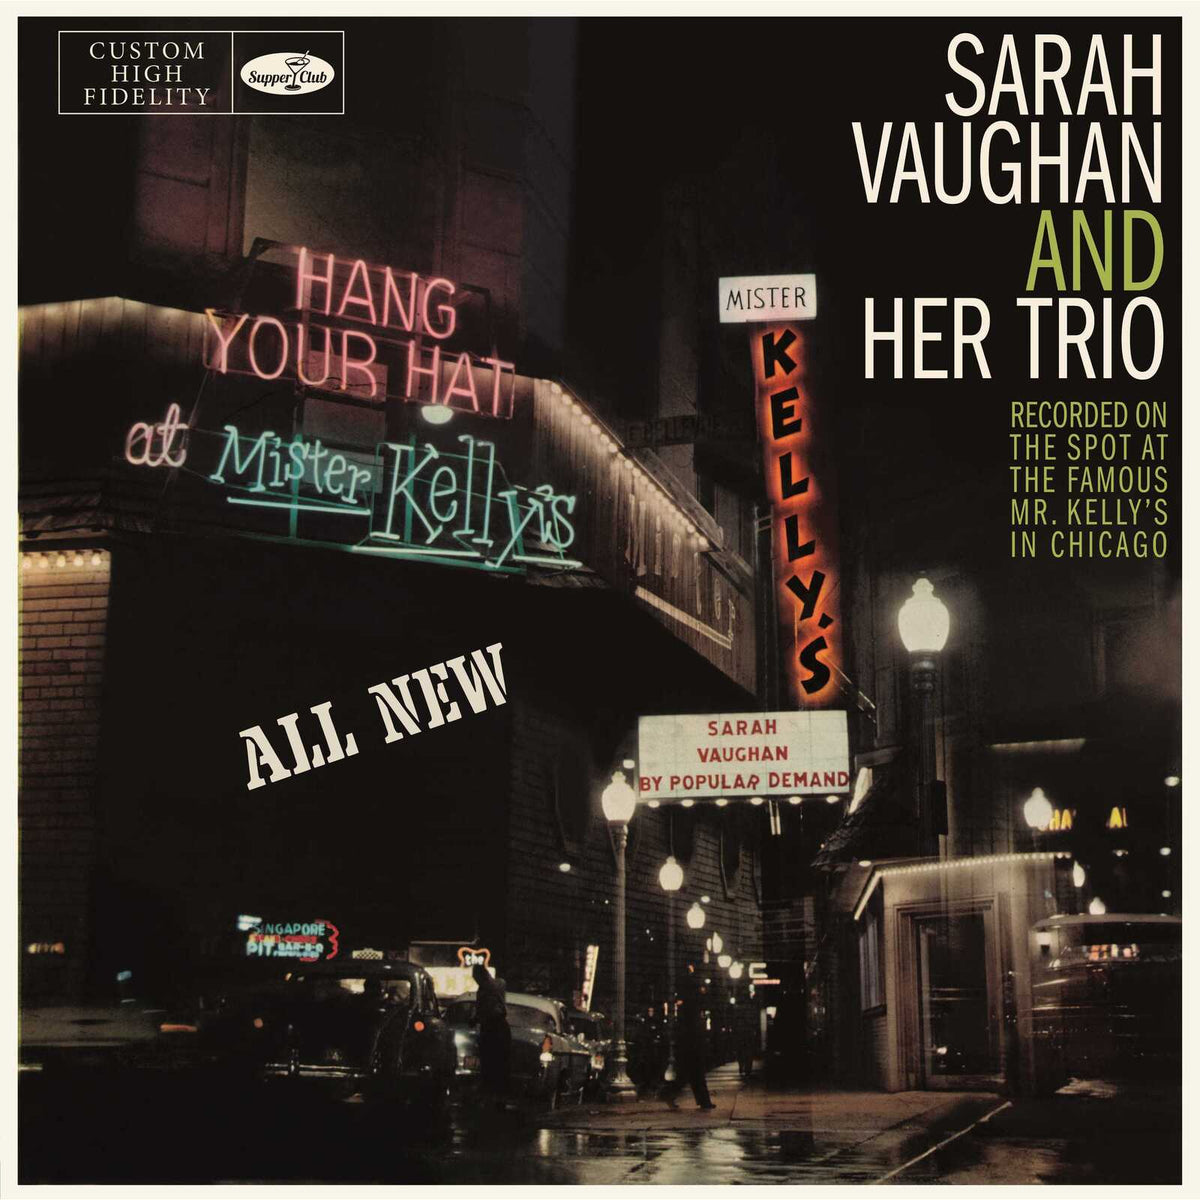 Sarah Vaughan and Her Trio - Sarah Vaughan and Her Trio At Mister Kelly's - 047SP